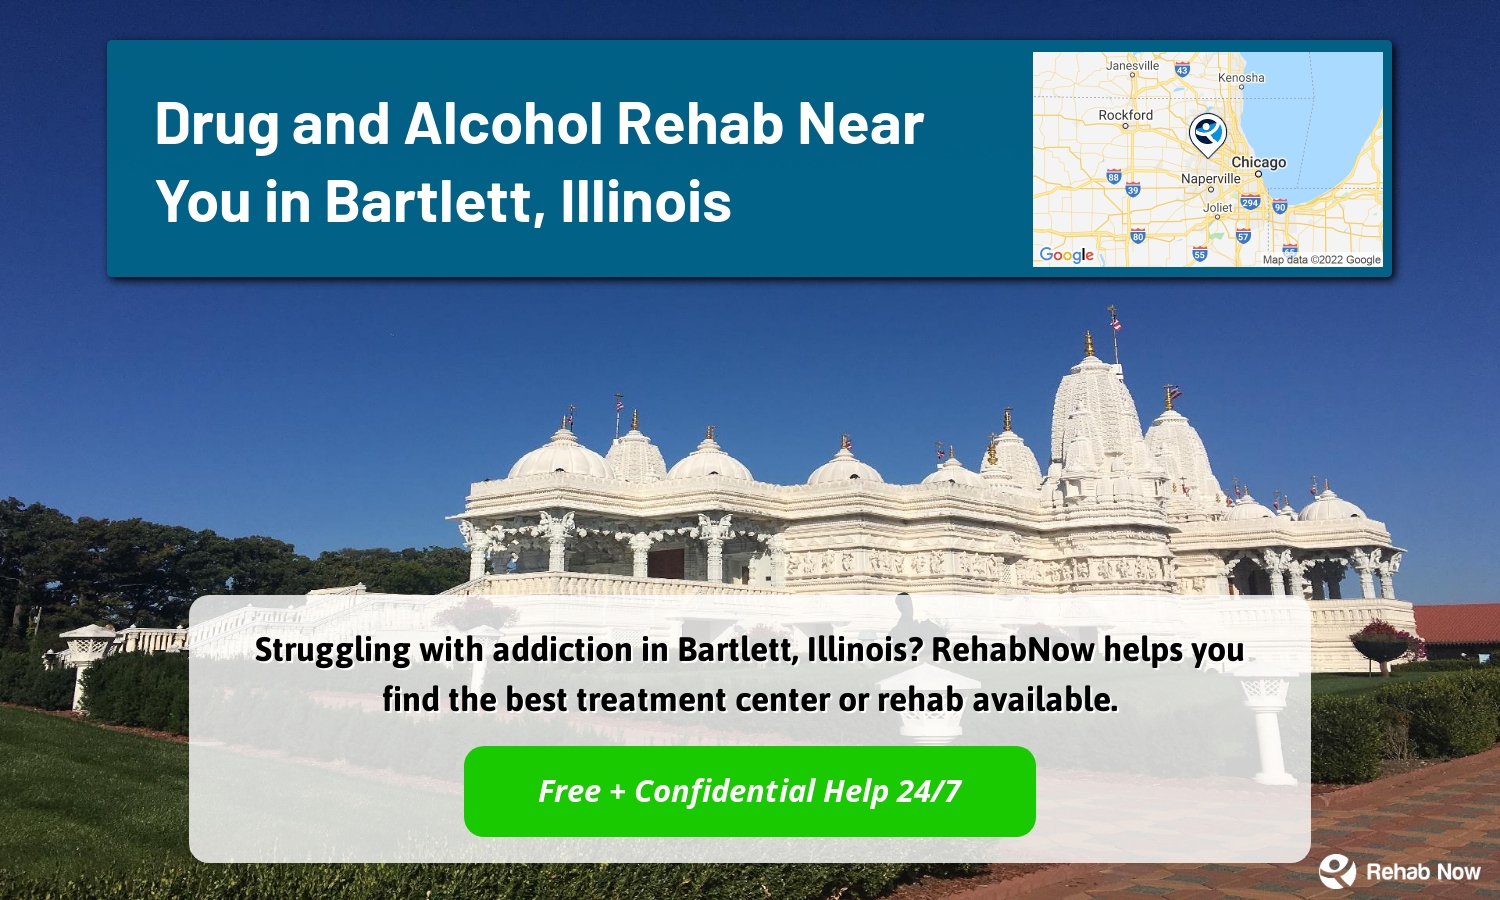 Struggling with addiction in Bartlett, Illinois? RehabNow helps you find the best treatment center or rehab available.